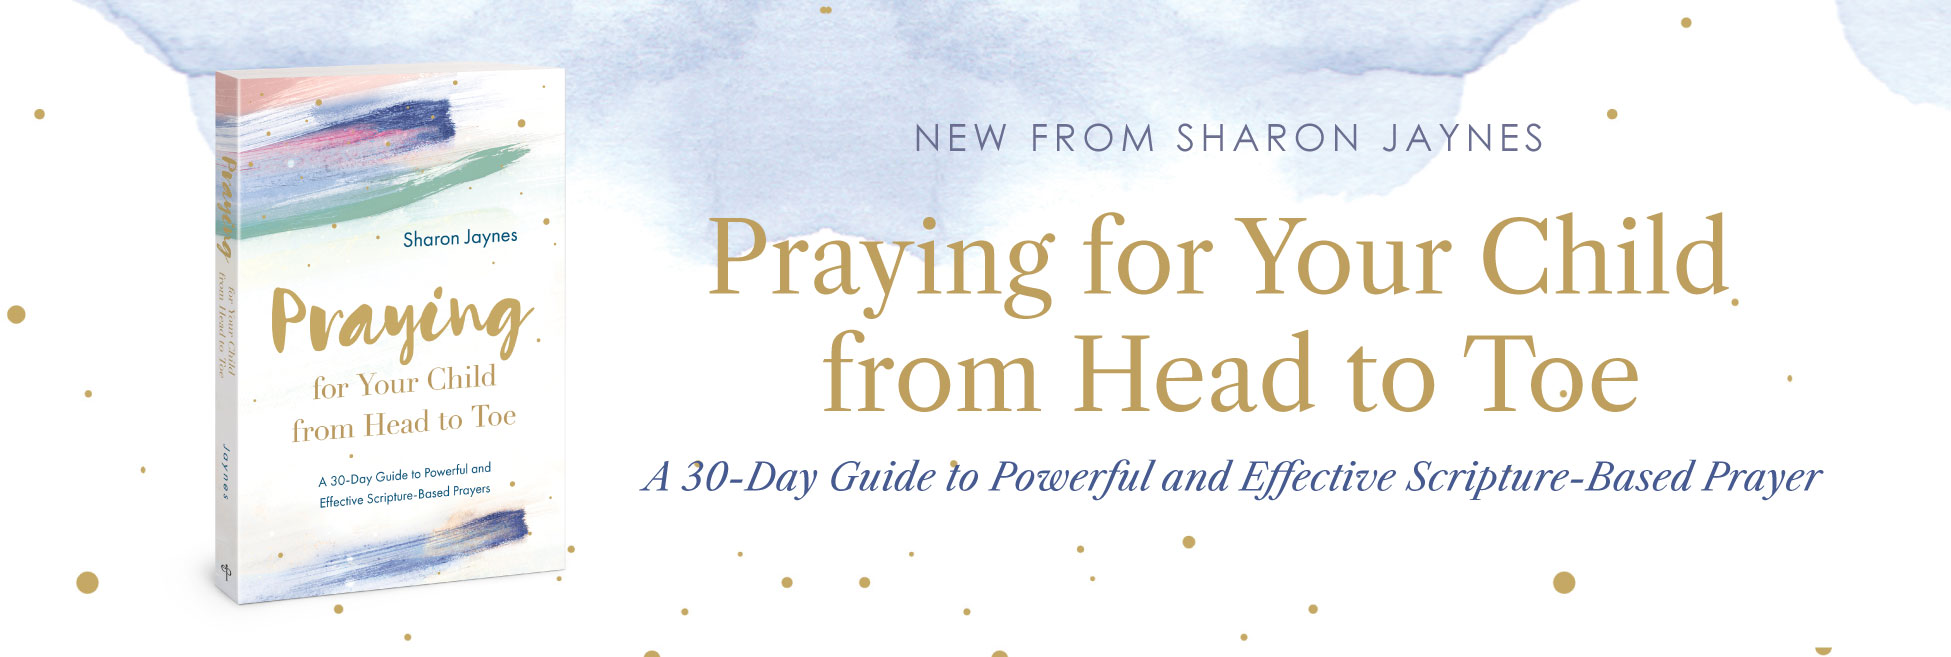 praying for your child from head to toe book banner